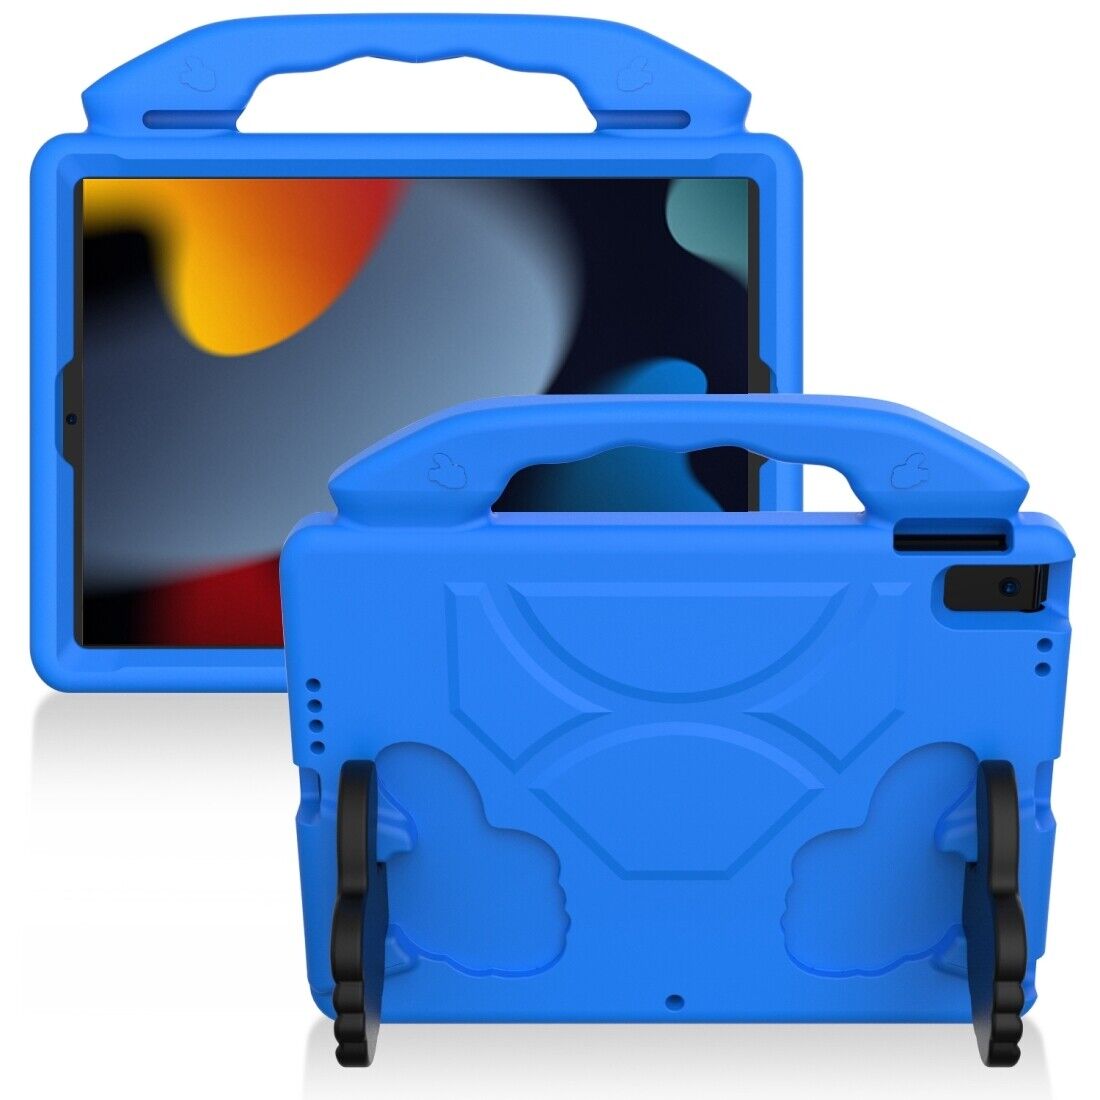 For Apple iPad Air 3 10.5" 2019 Kids Friendly Case Shockproof Cover With Thumbs Up - Blue